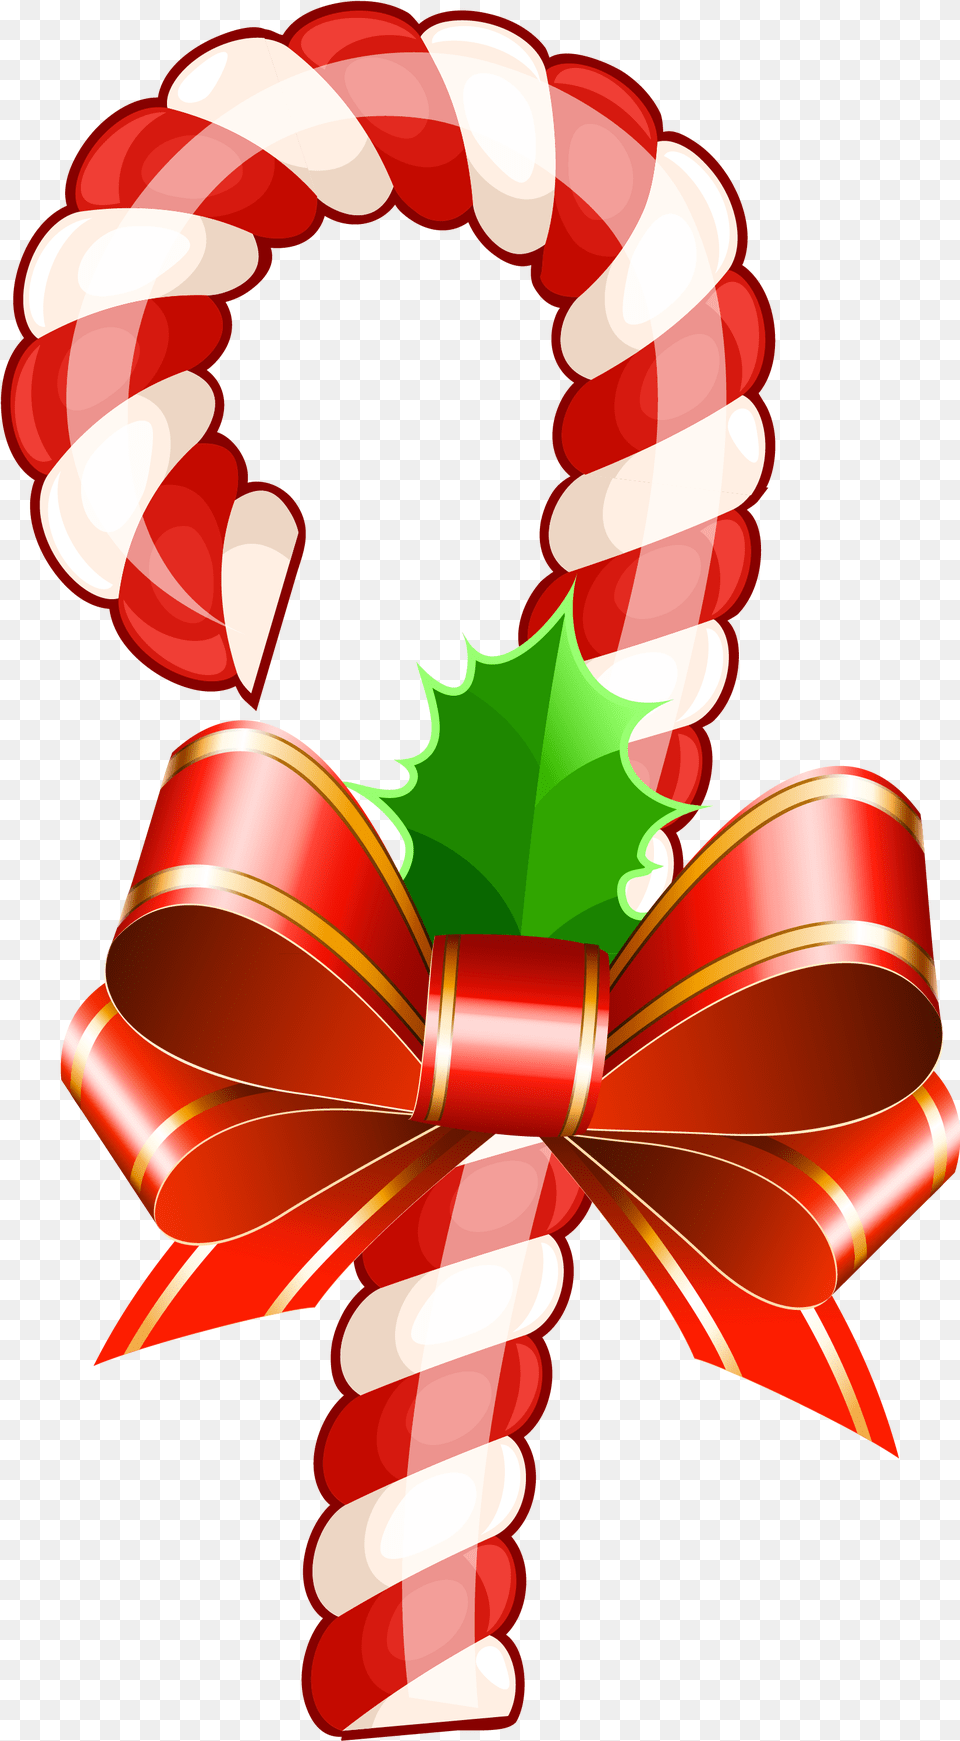 Cute Christmas Candy Cane, Food, Sweets, Dynamite, Weapon Png Image